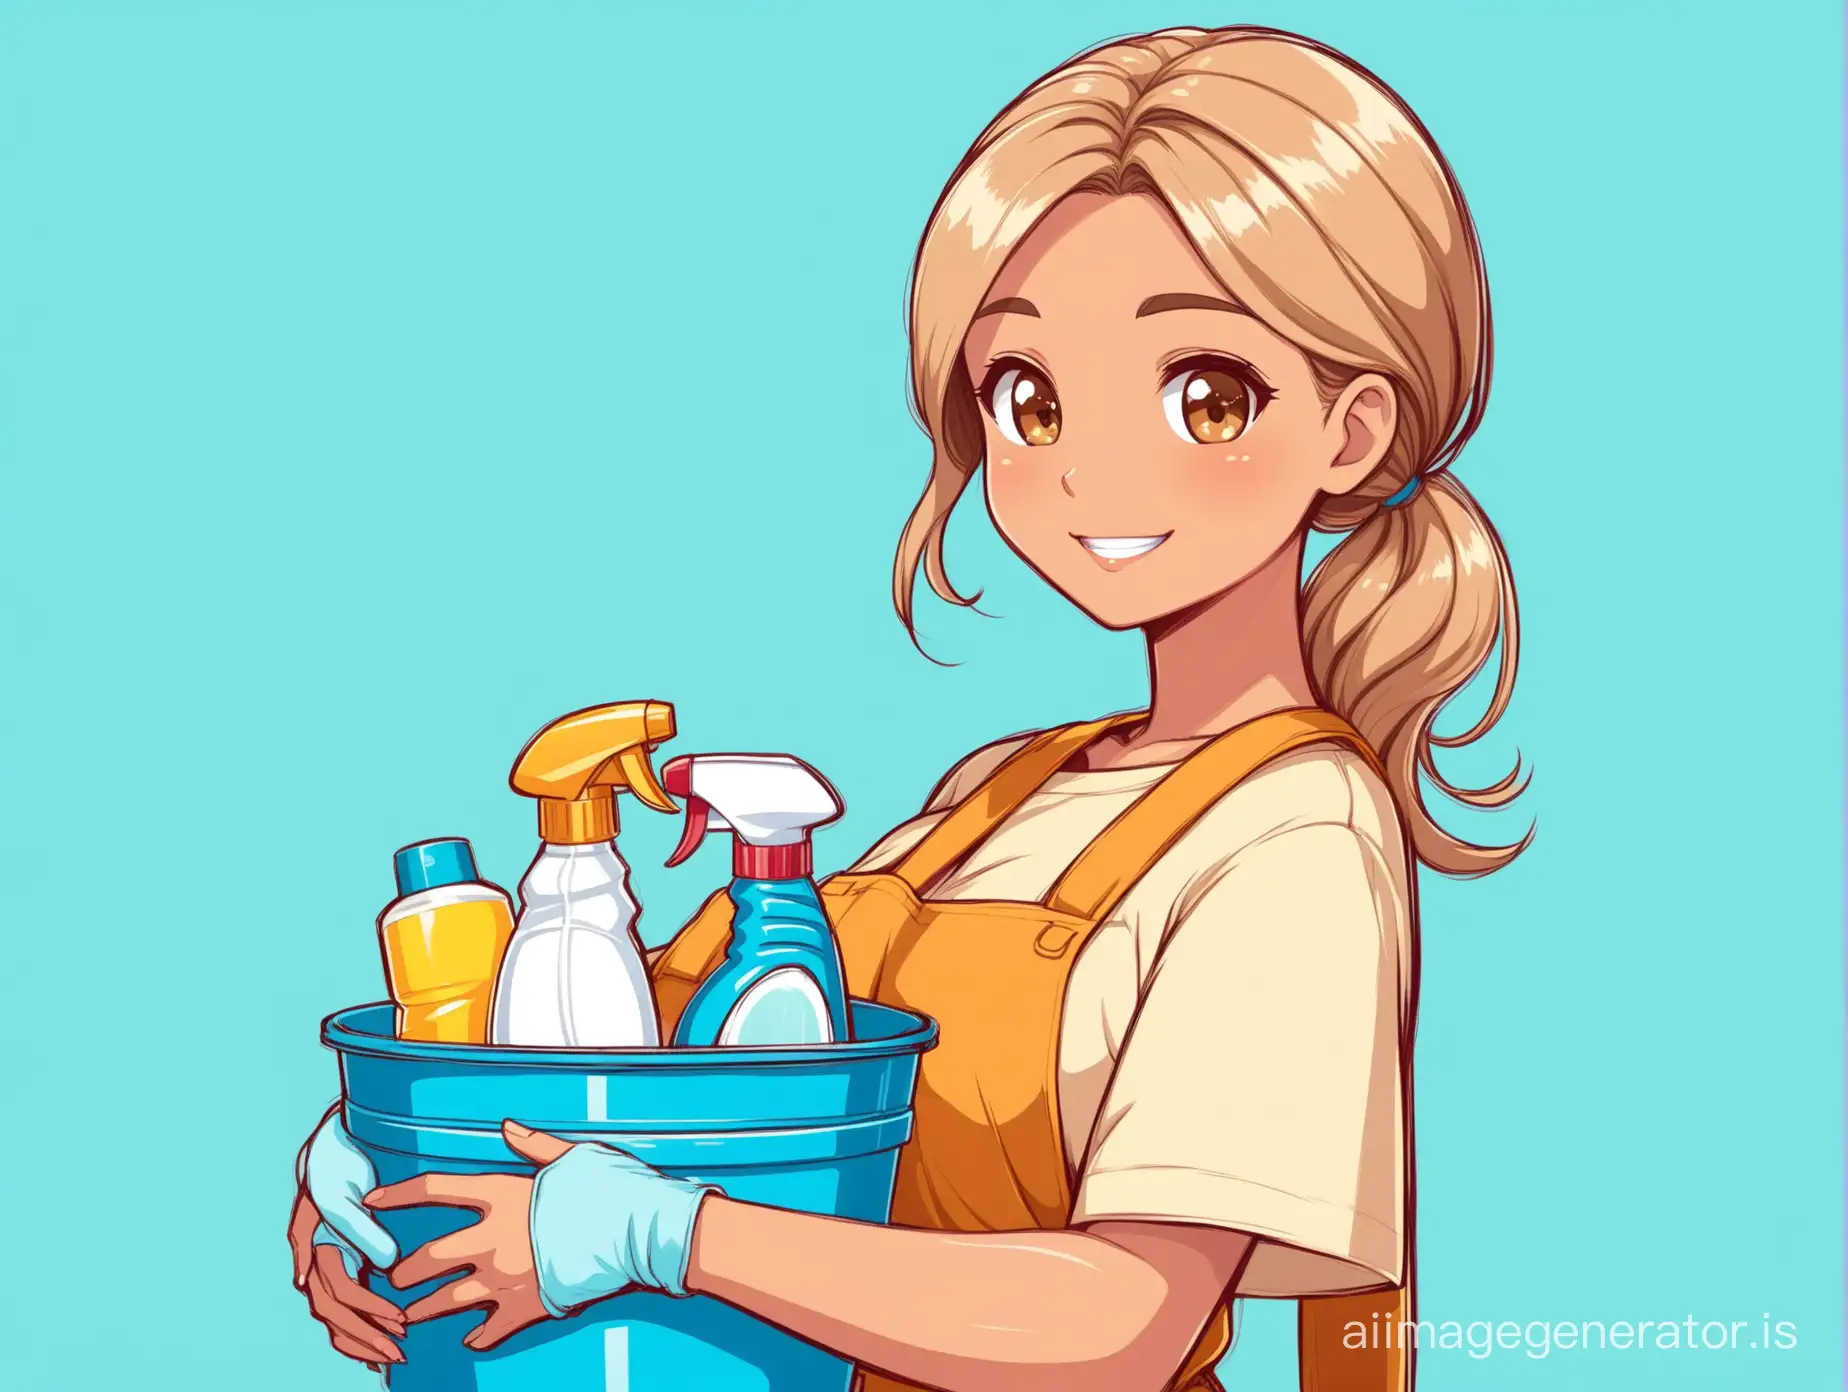 Cartoon-Woman-Cleaner-Holding-Bucket-with-Cleaning-Products-on-Light-Blue-Background